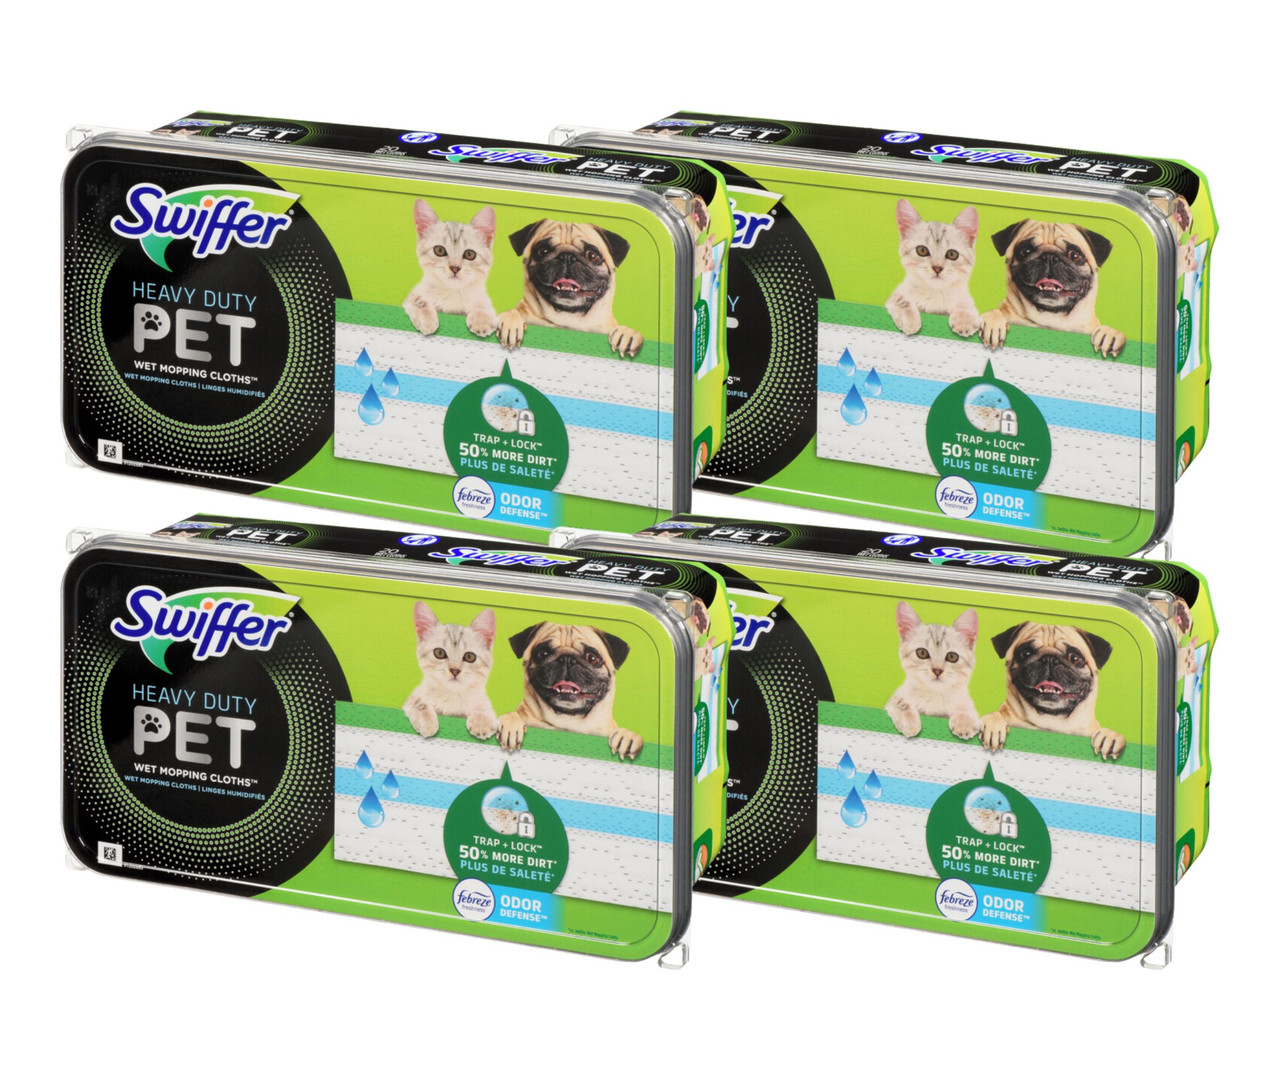 SWIFFER Sweeper Pet Multi-Surface Wet Cloth Refills - 20 Count(4/Case)-Chicken Pieces